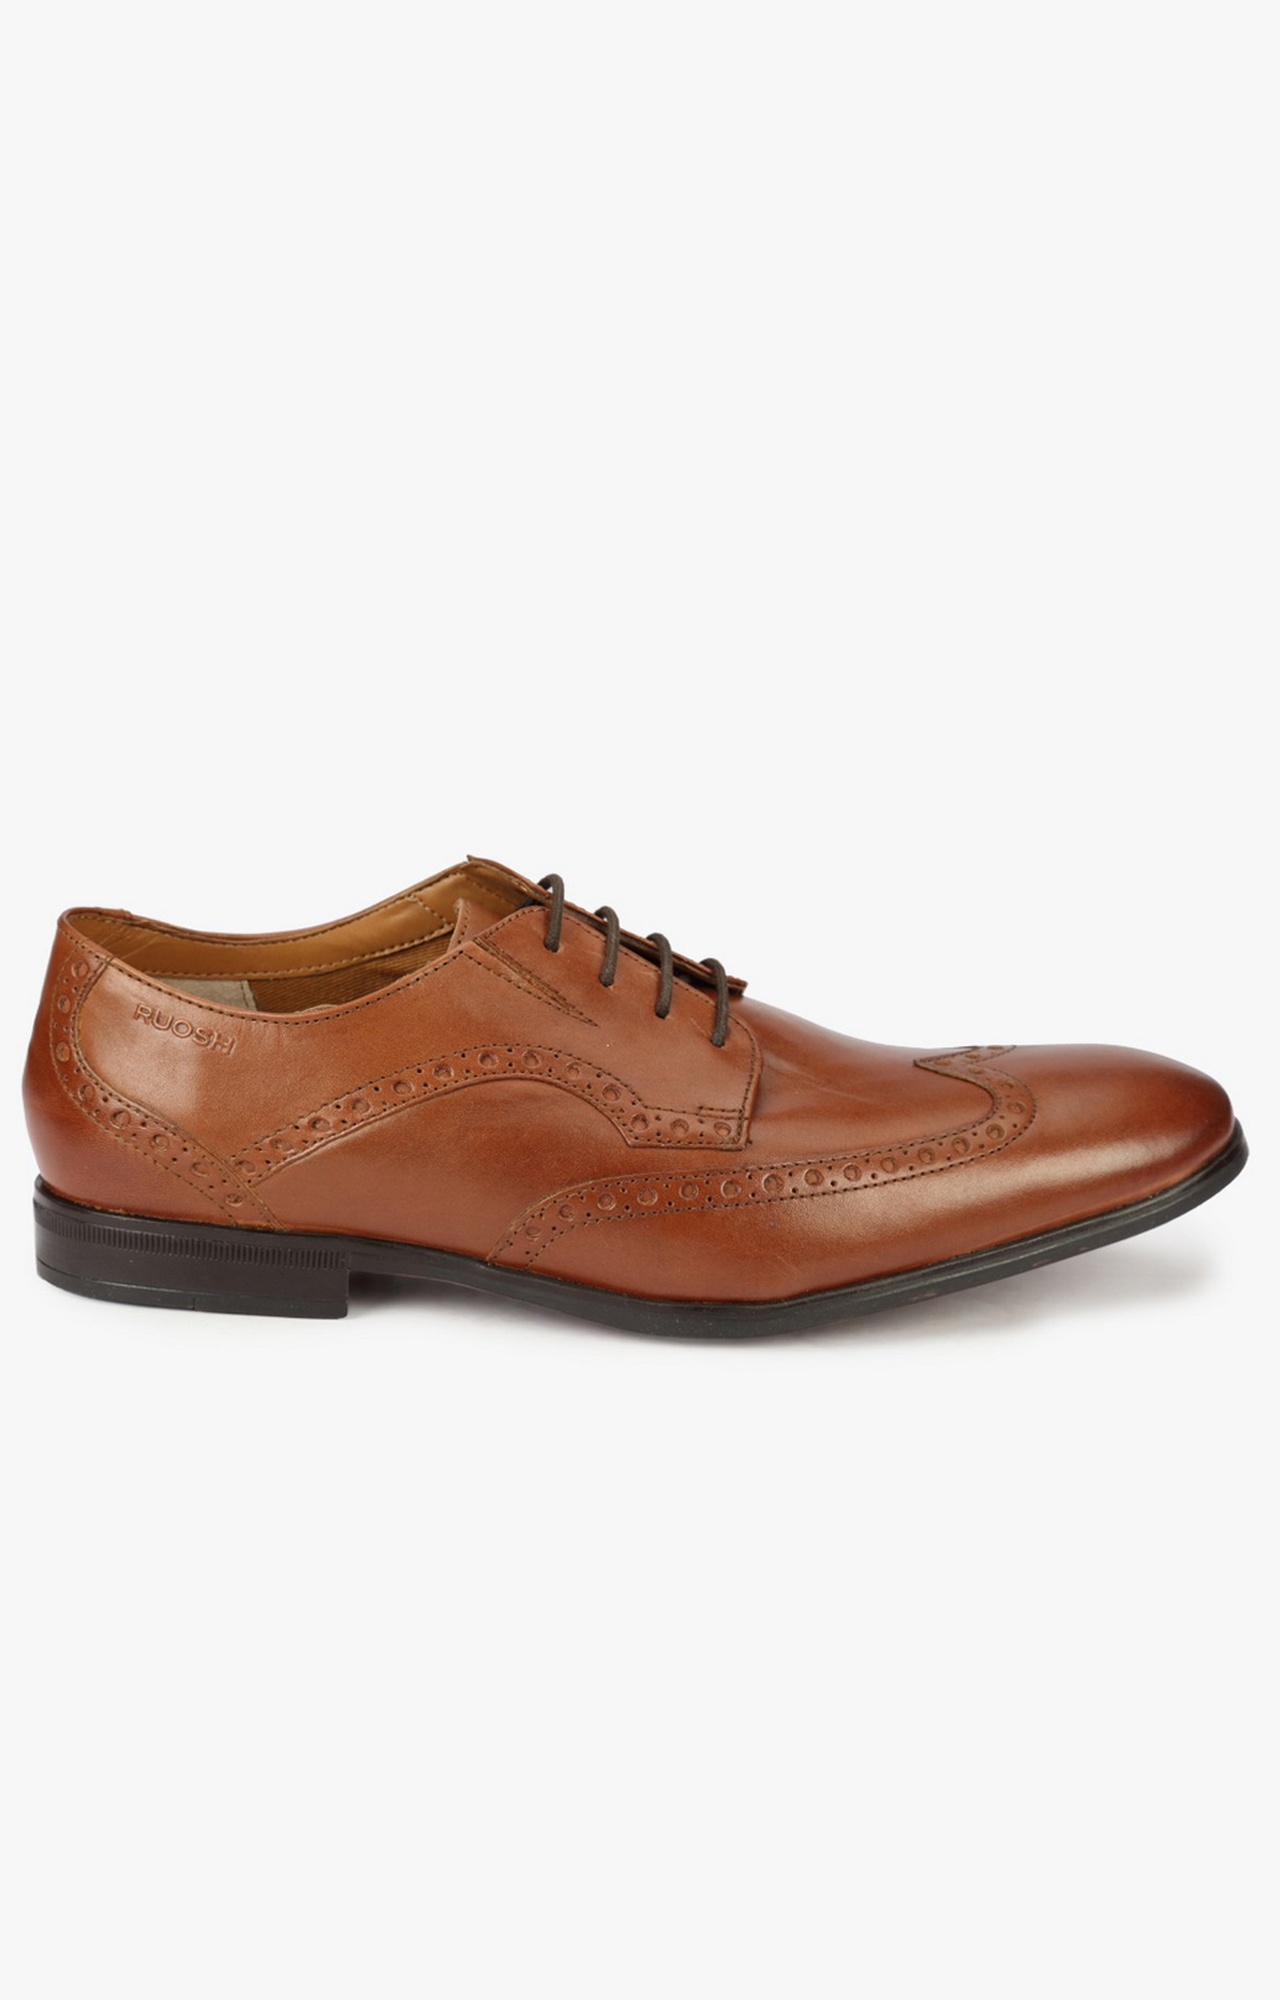 Ruosh | Tan Derby Shoes 1